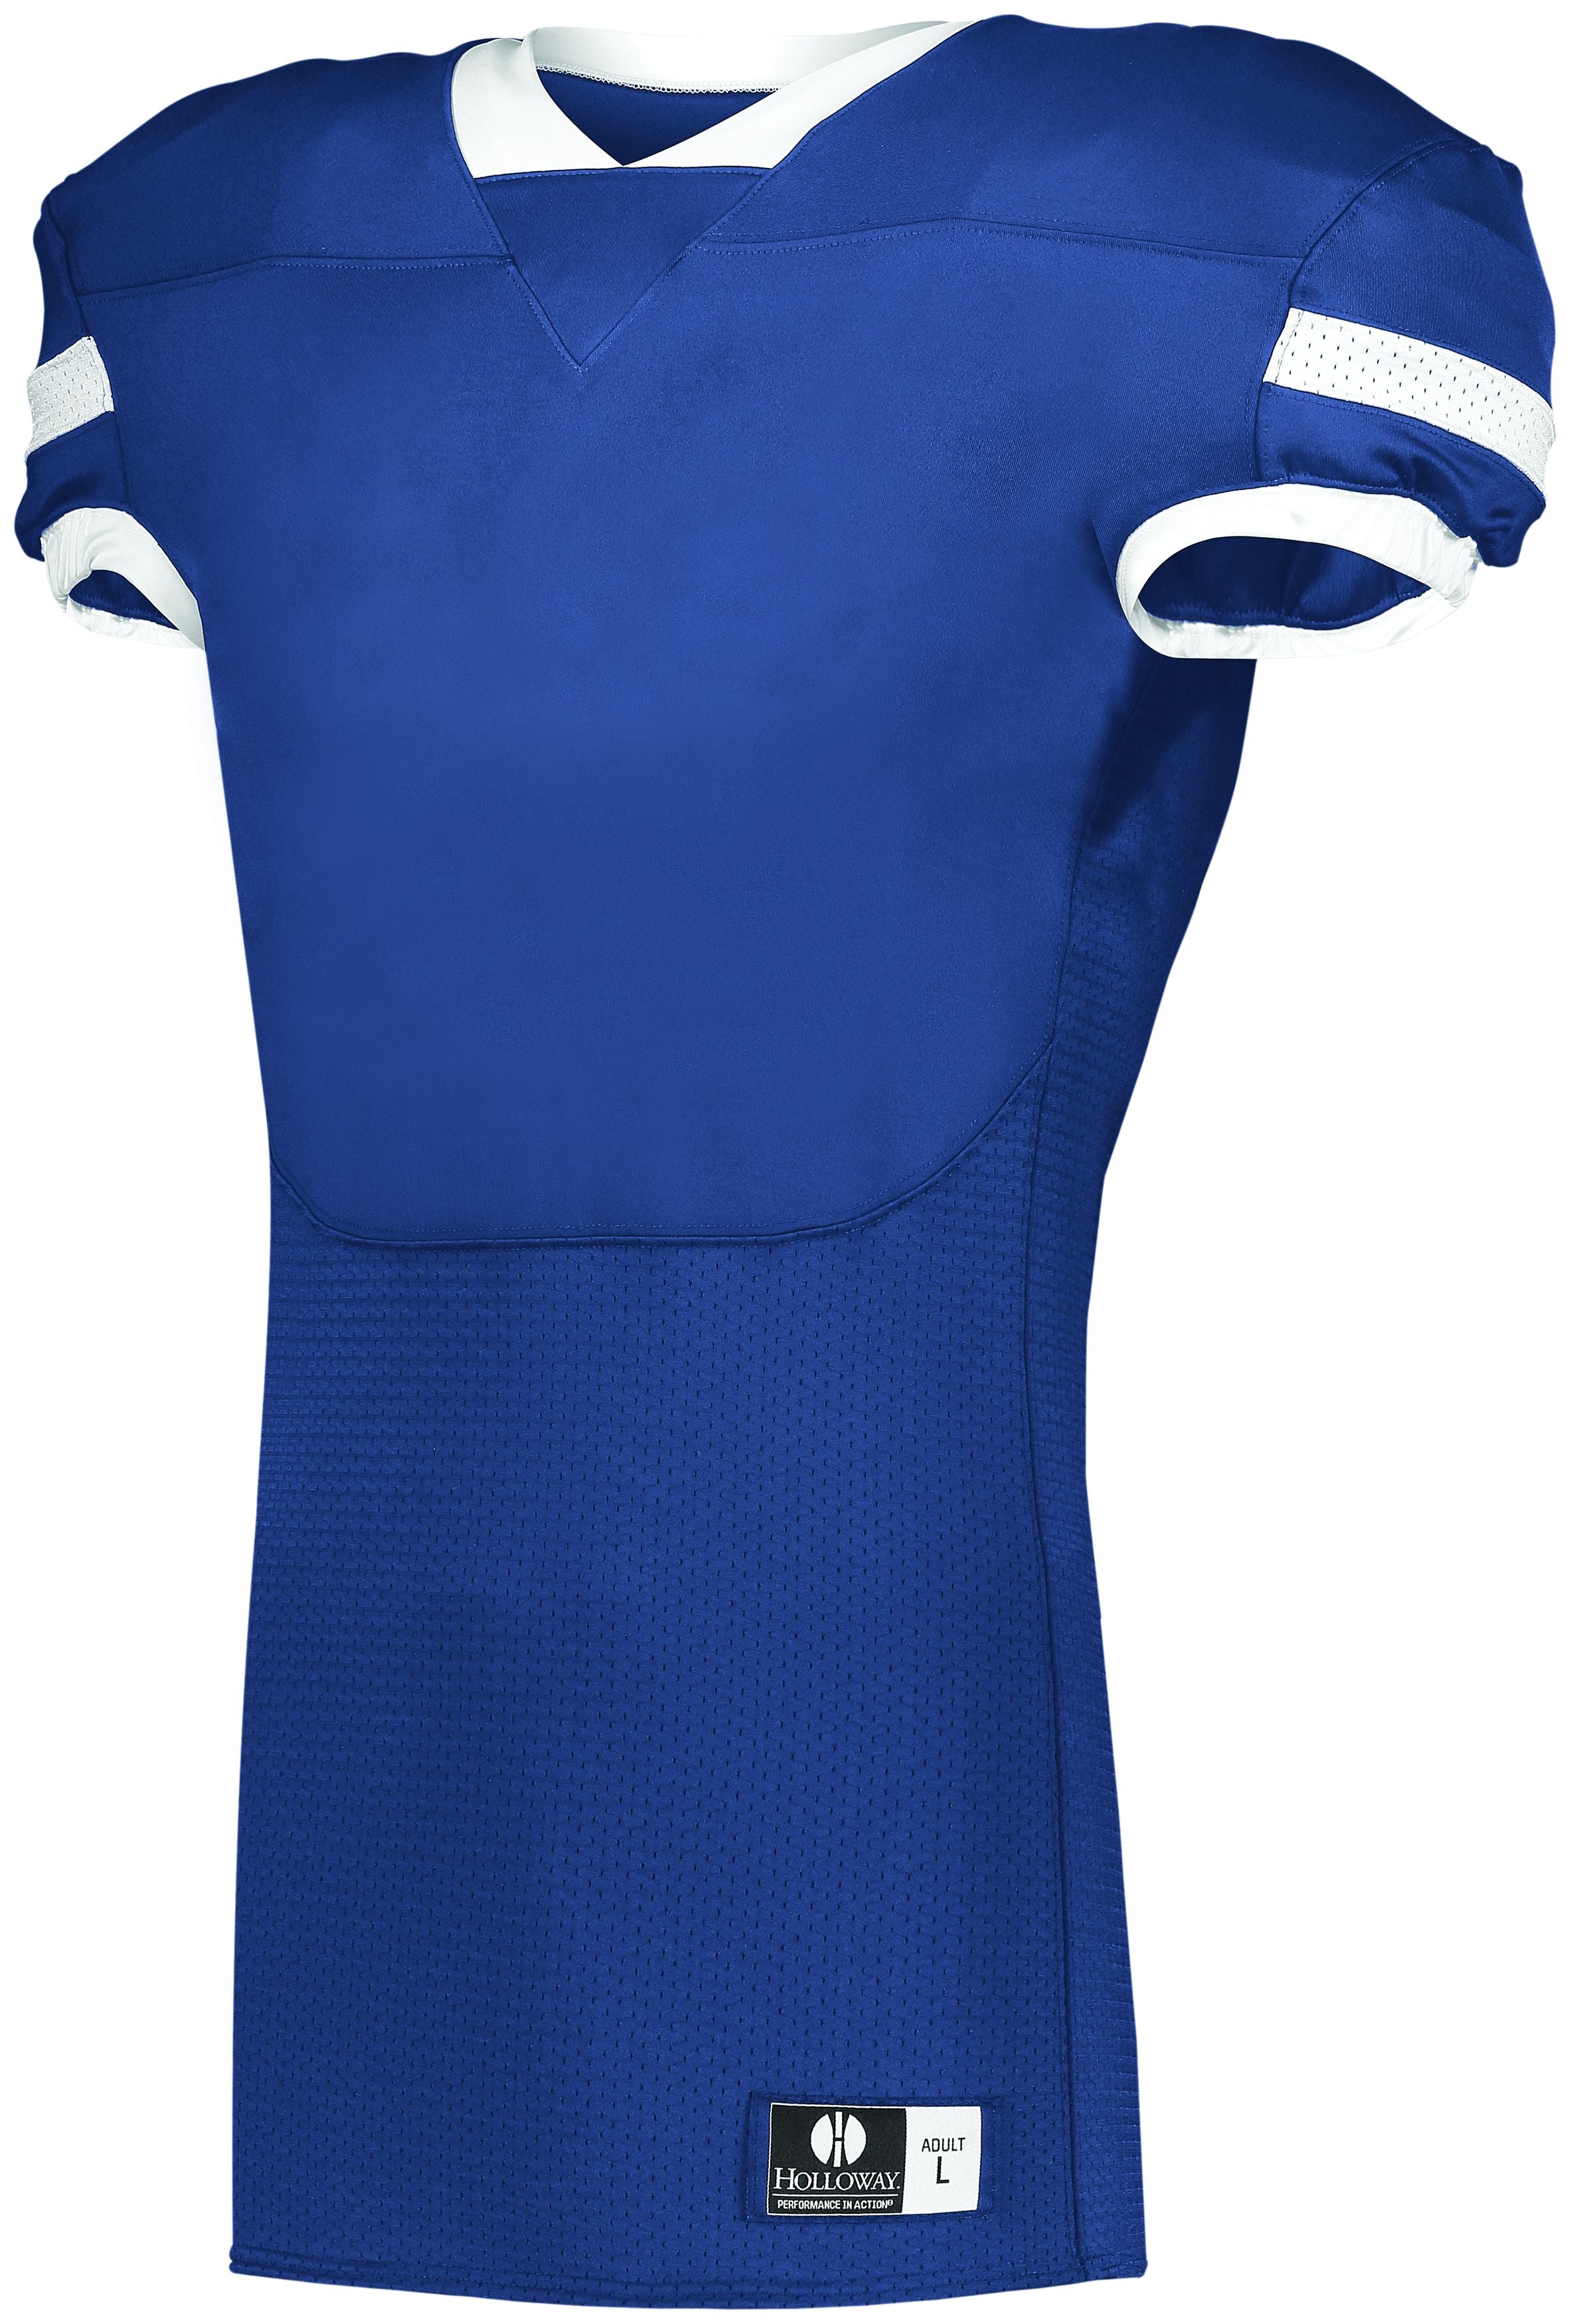 A4 Apparel N4190 Football Practice Jersey - Navy - 4X-Large 